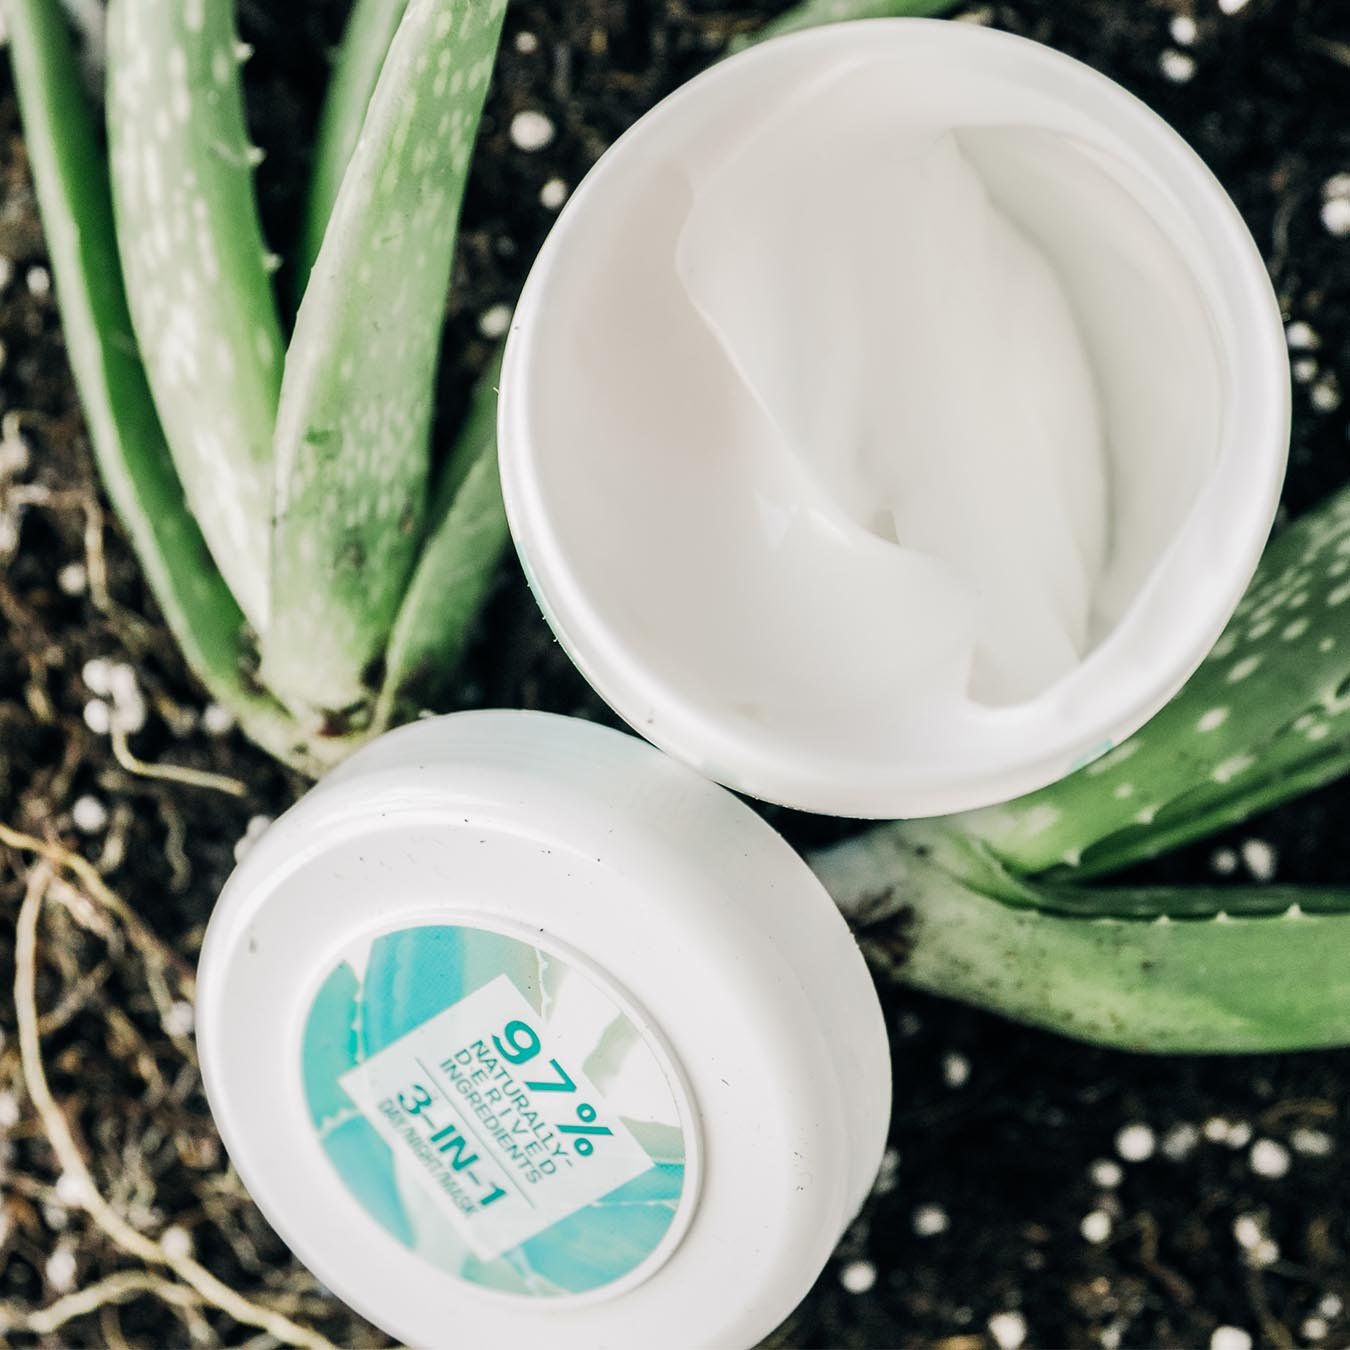 Garnier SkinActive 3-in-1 Day/Night Mask with Aloe Juice open between two aloe plants in a bed of soil.